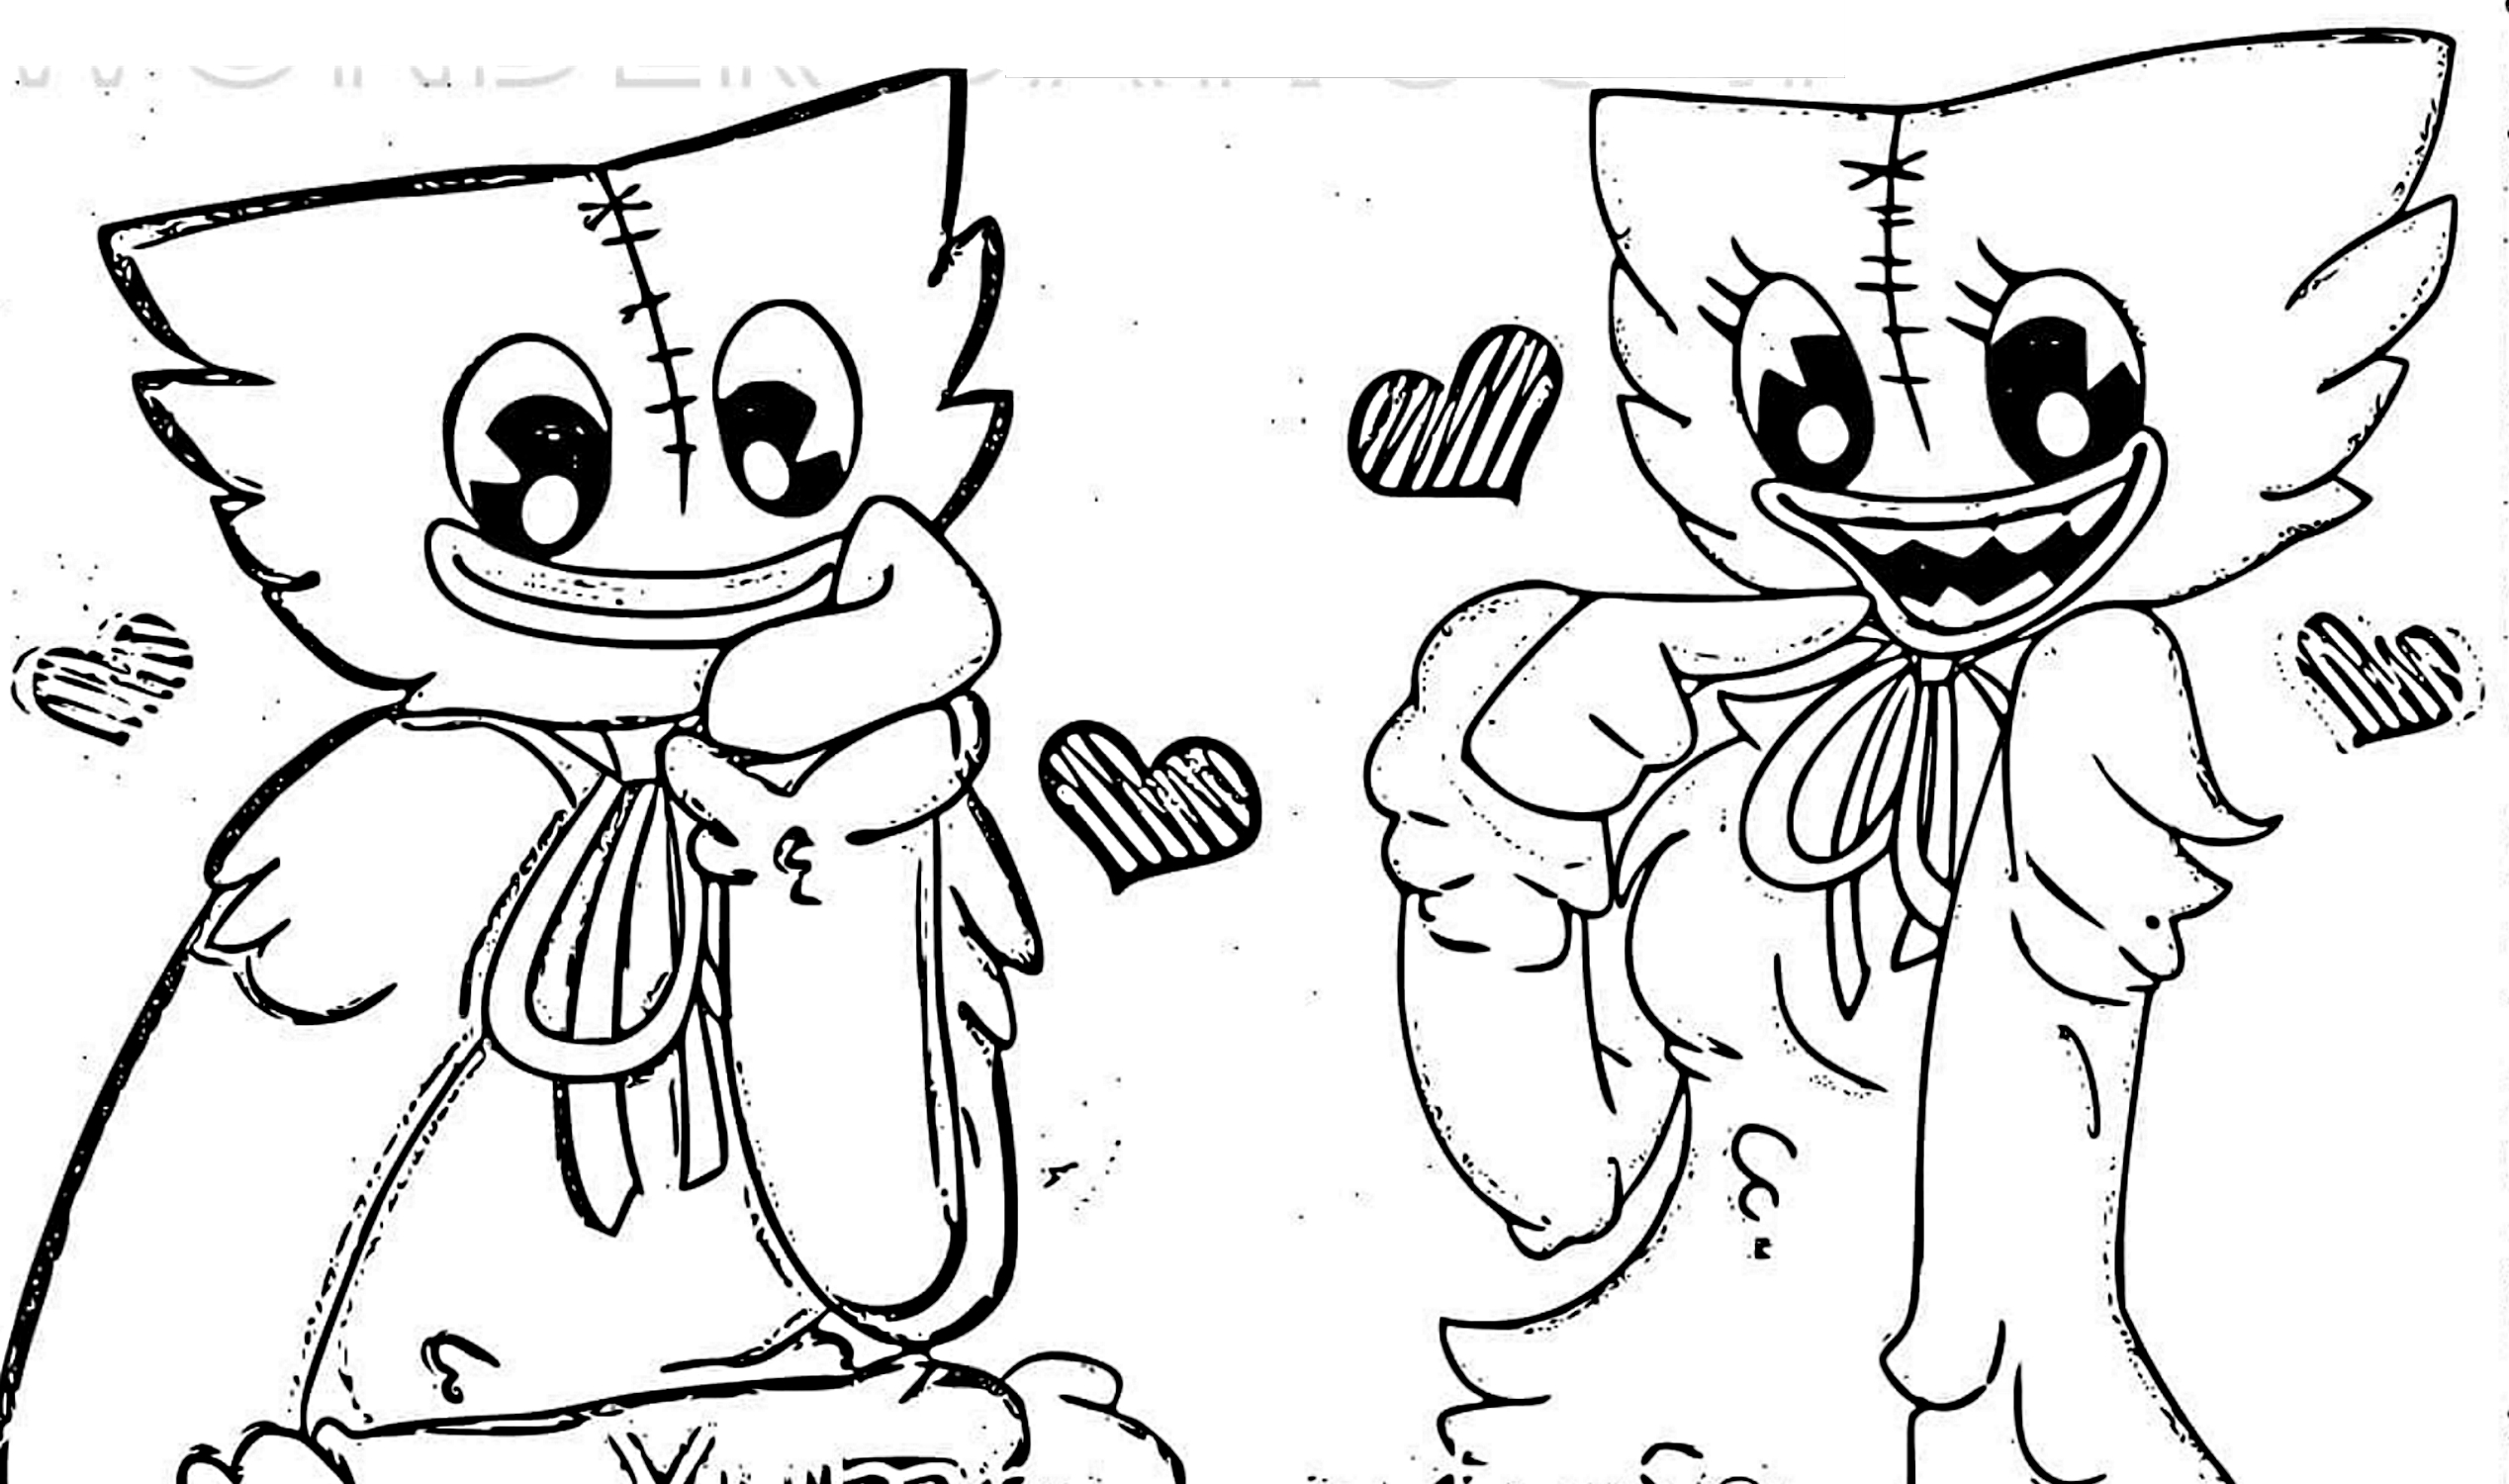 Kissy Missy 11 from Poppy Playtime coloring page to print and coloring